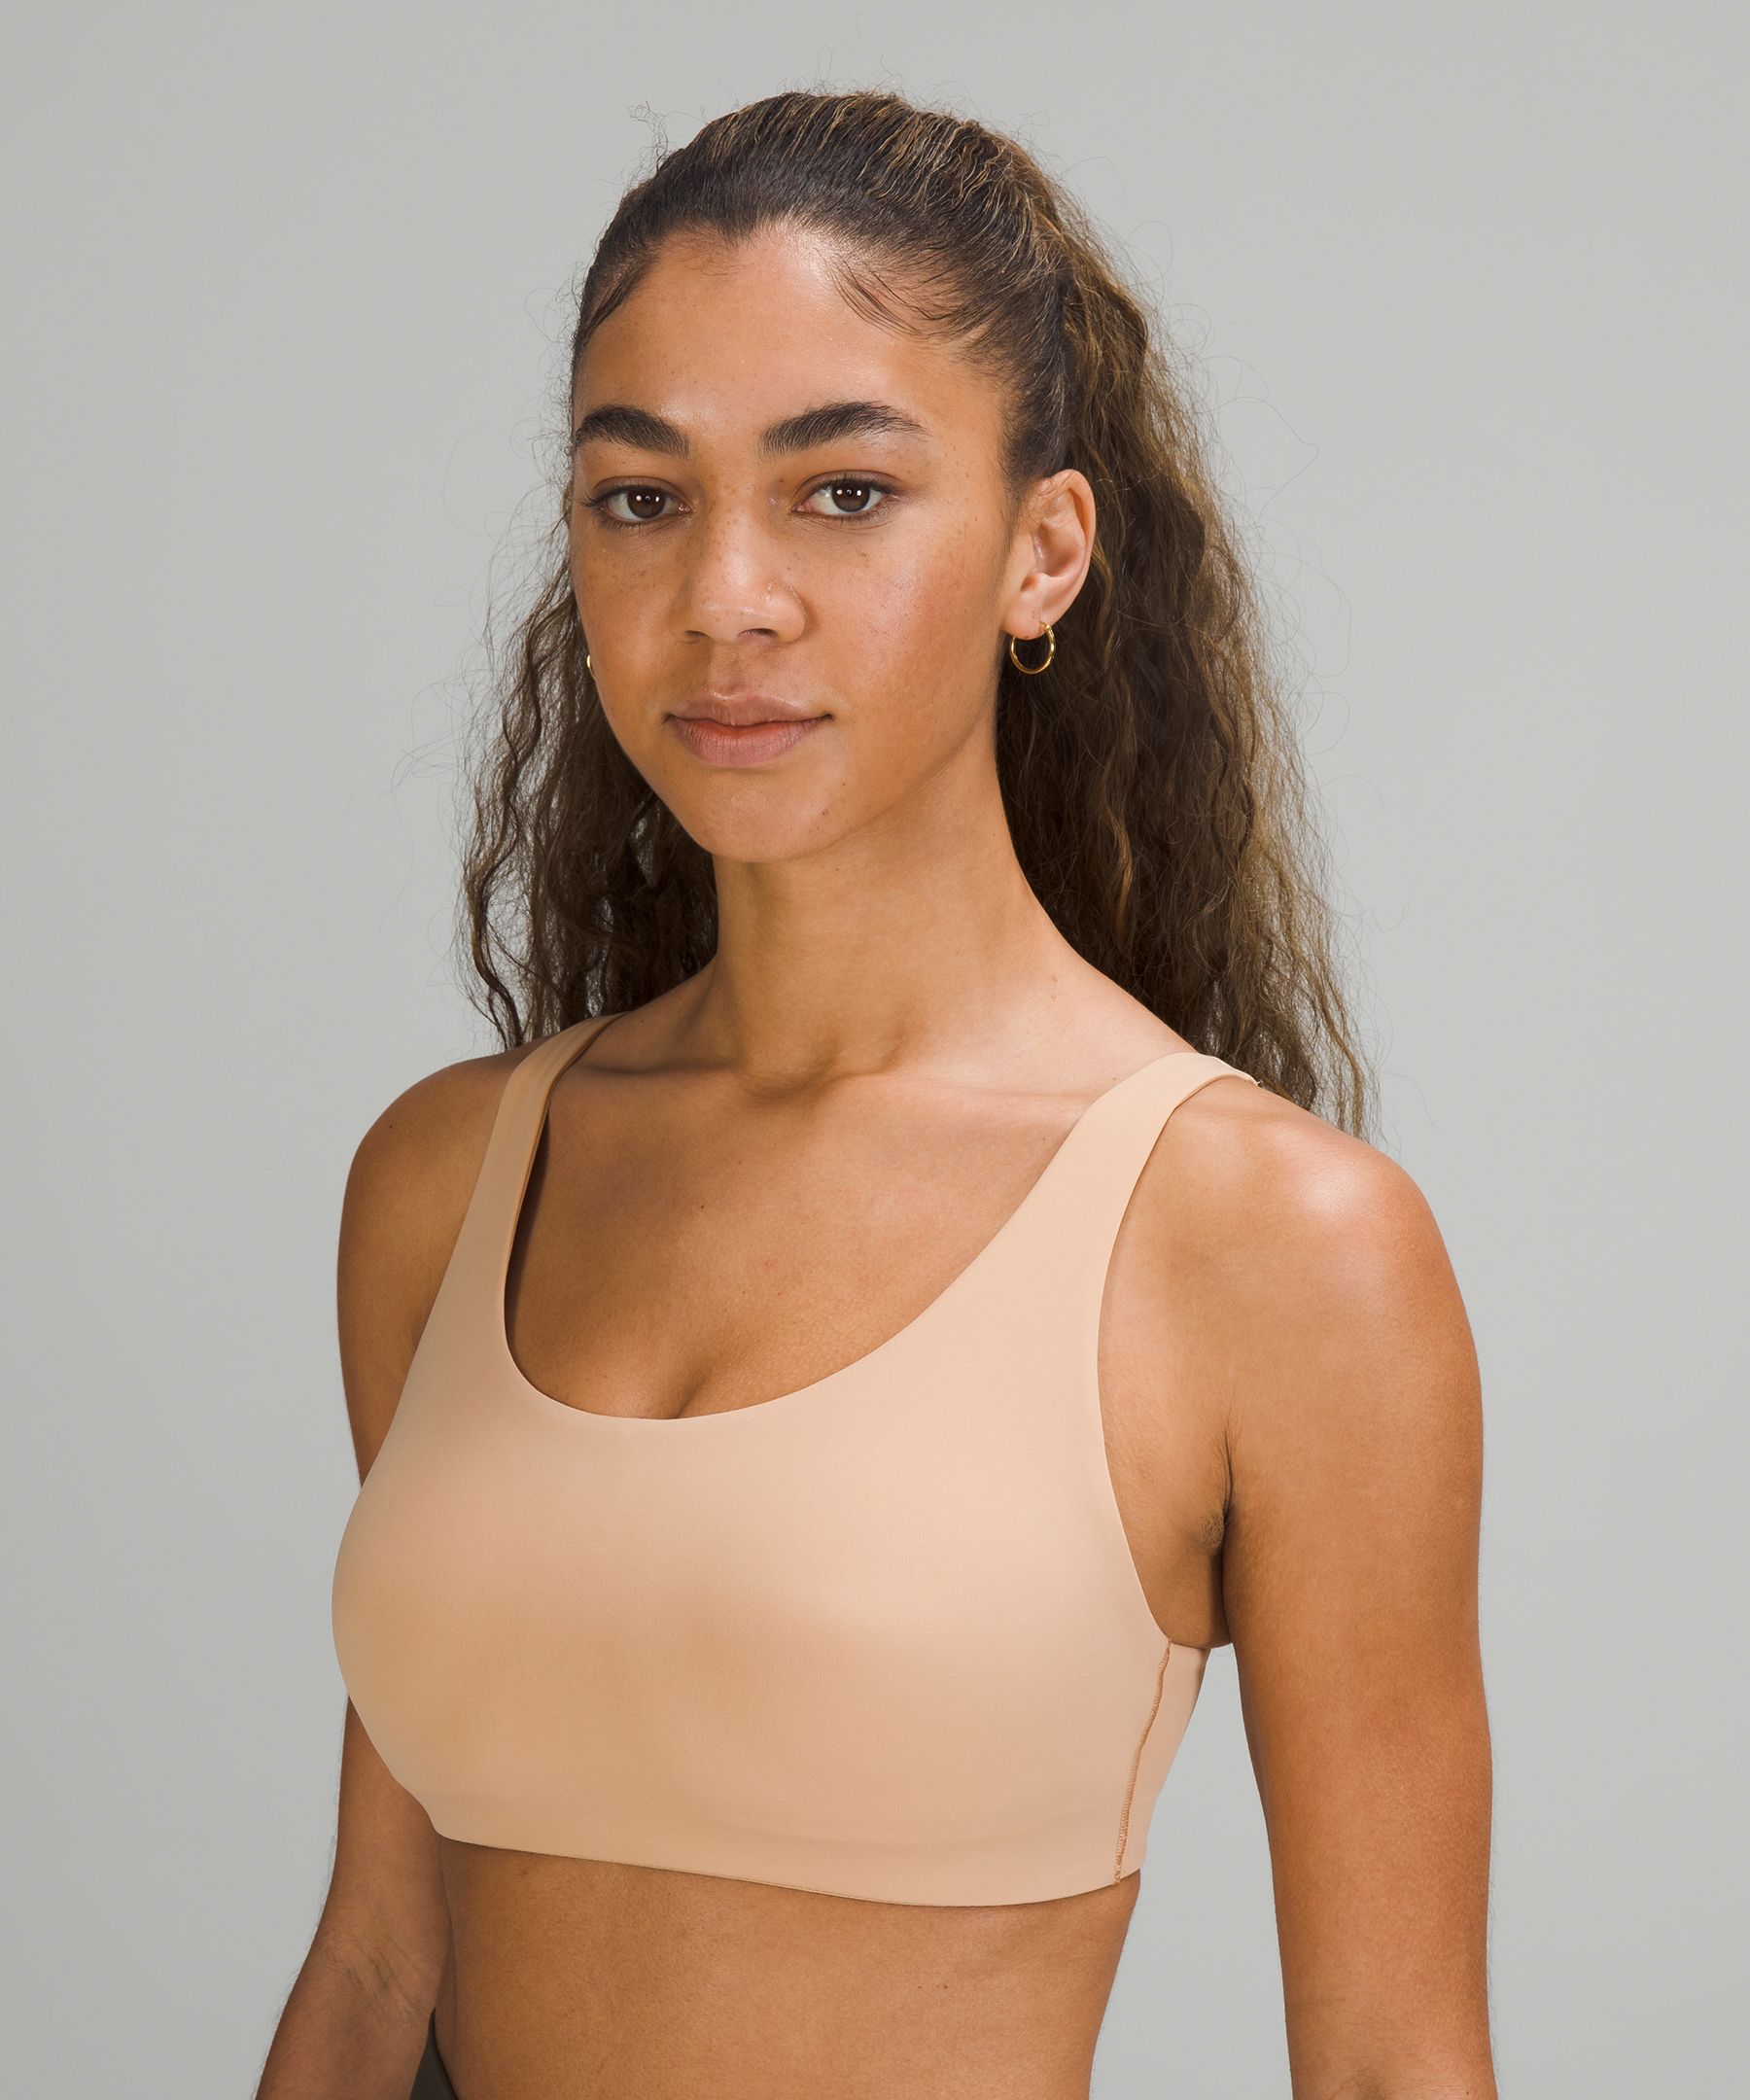 Lululemon Women's In Alignment Straight-Strap Bra Light Support, A/B Cup